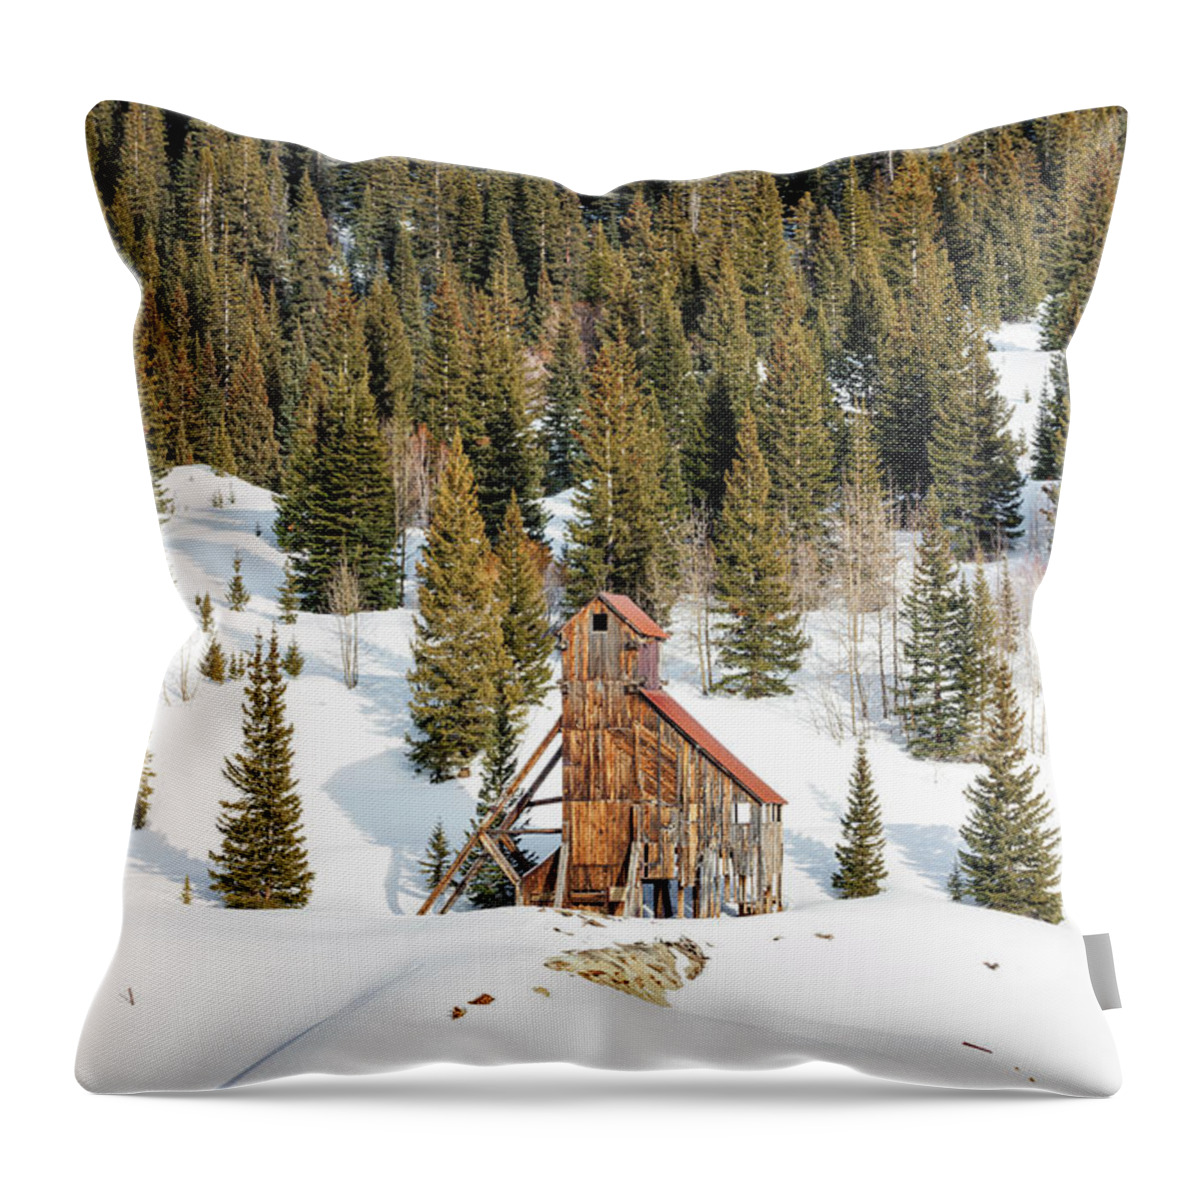 Yankee Girl Throw Pillow featuring the photograph Yankee Girl In Winter by Denise Bush